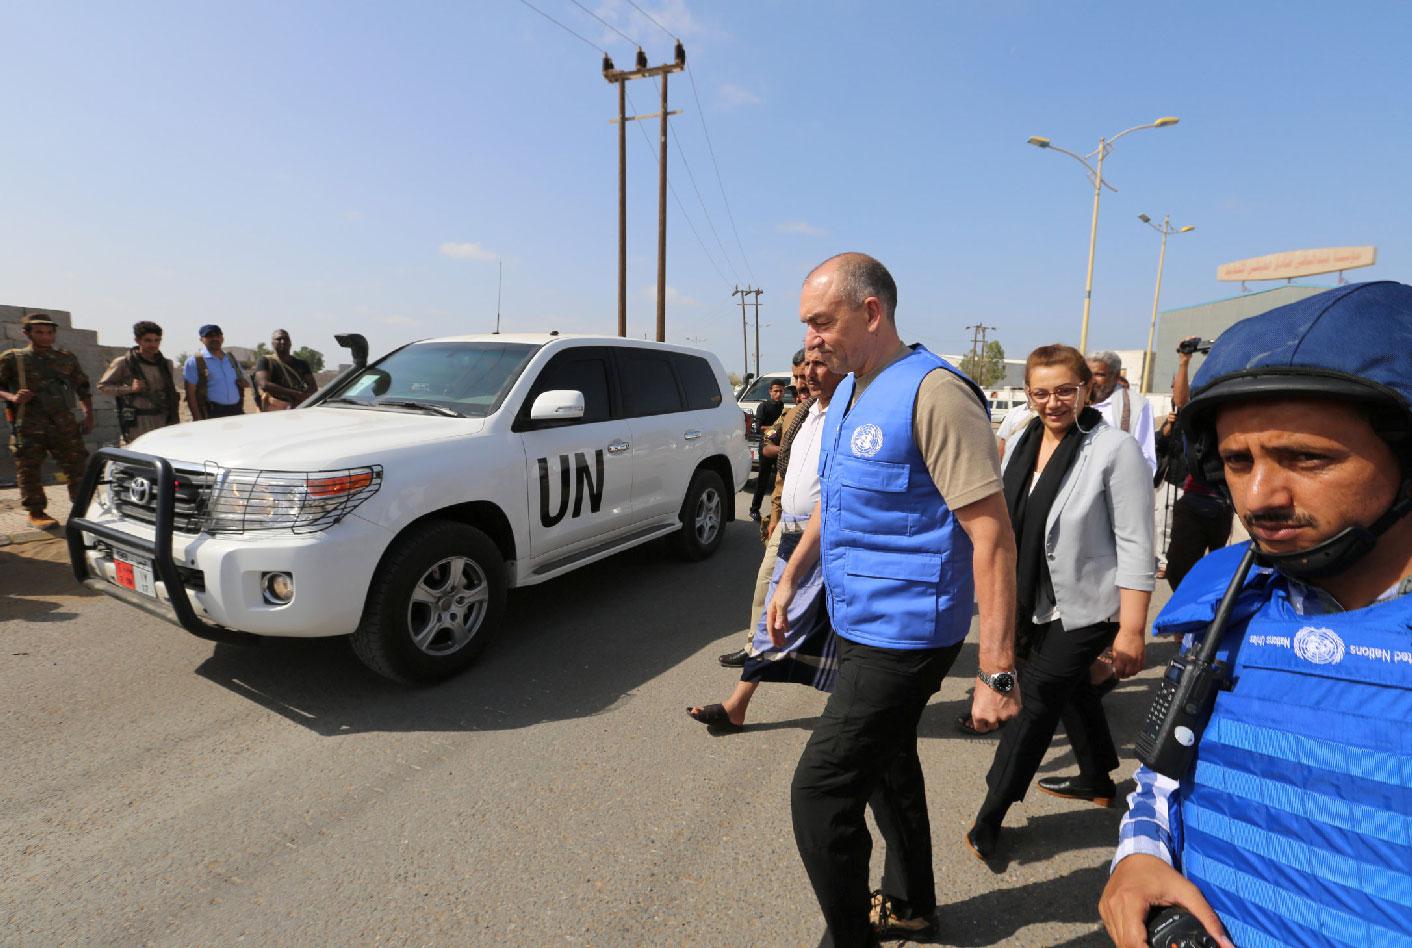 Danish Major General Michael Lollesgaard, who heads a U.N. team tasked with monitoring a ceasefire between Houthis and Yemeni government forces, walks by a convoy of a U.N. and WFP team crossing from Houthi-controlled areas to a government-controlled areas to reach grain mills in an eastern suburb of Hodeidah, Yemen February 26, 2019.